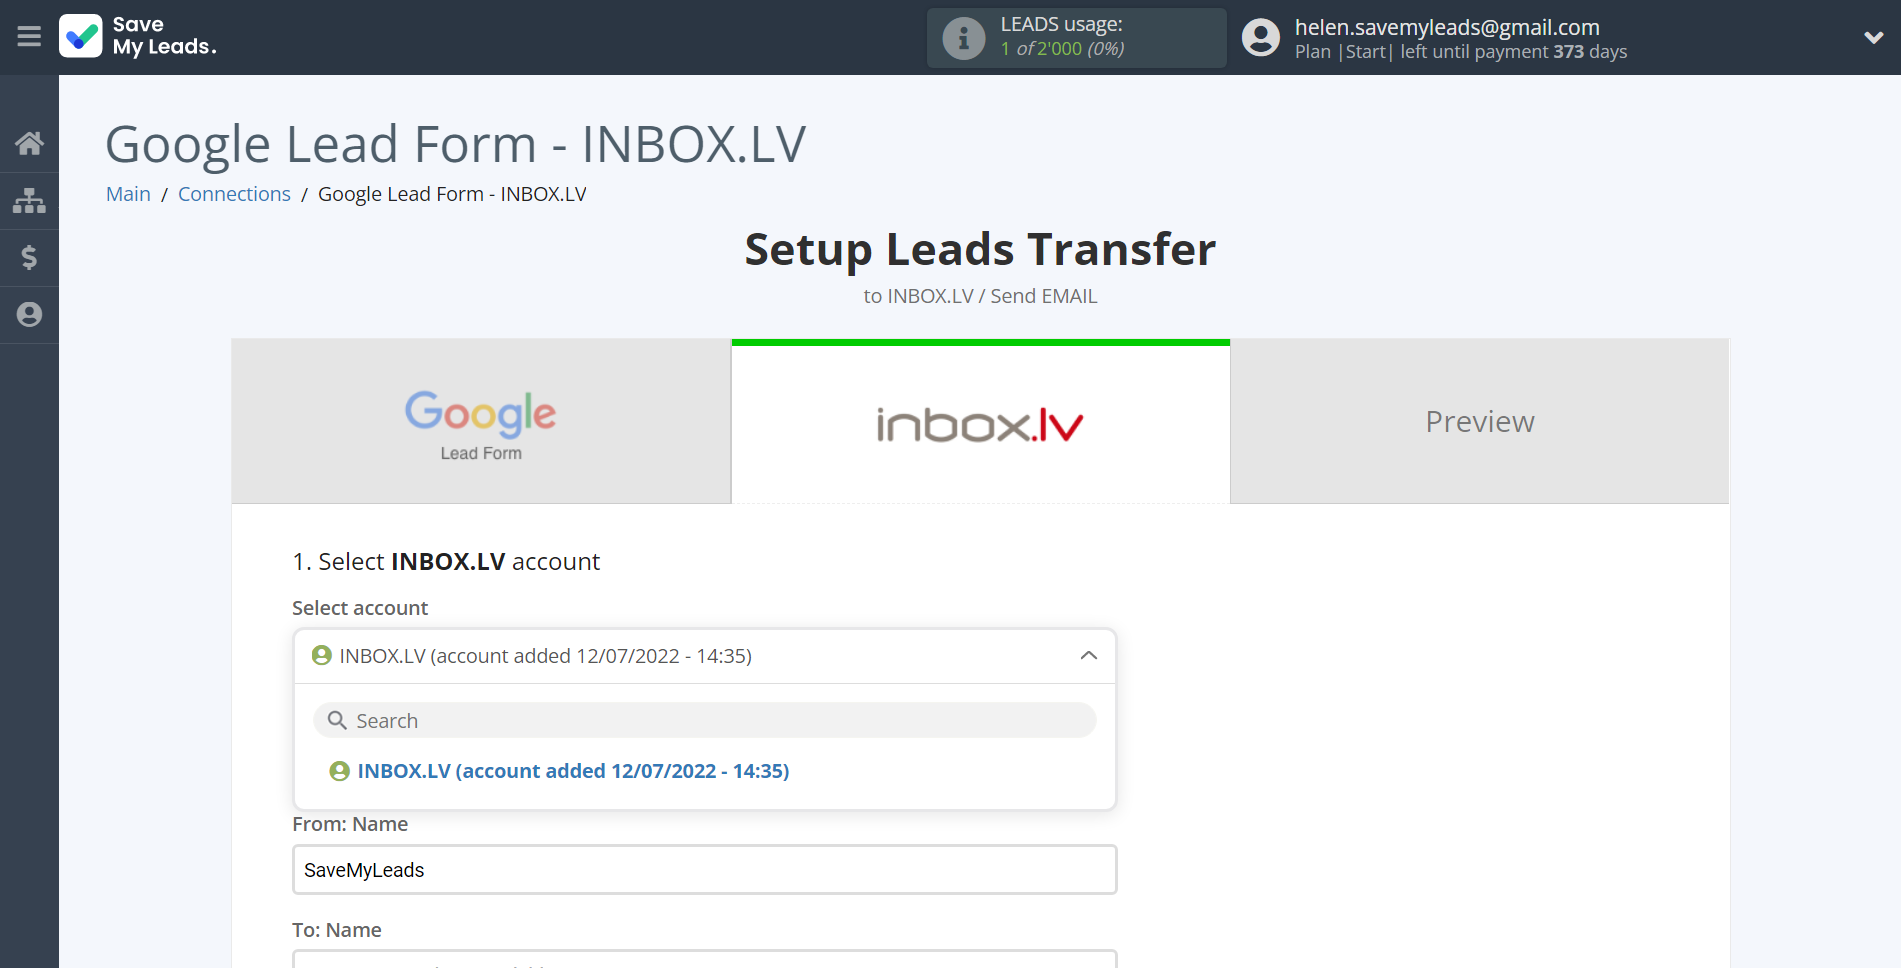 How to Connect Google Lead Form with INBOX.LV | Data Destination account selection